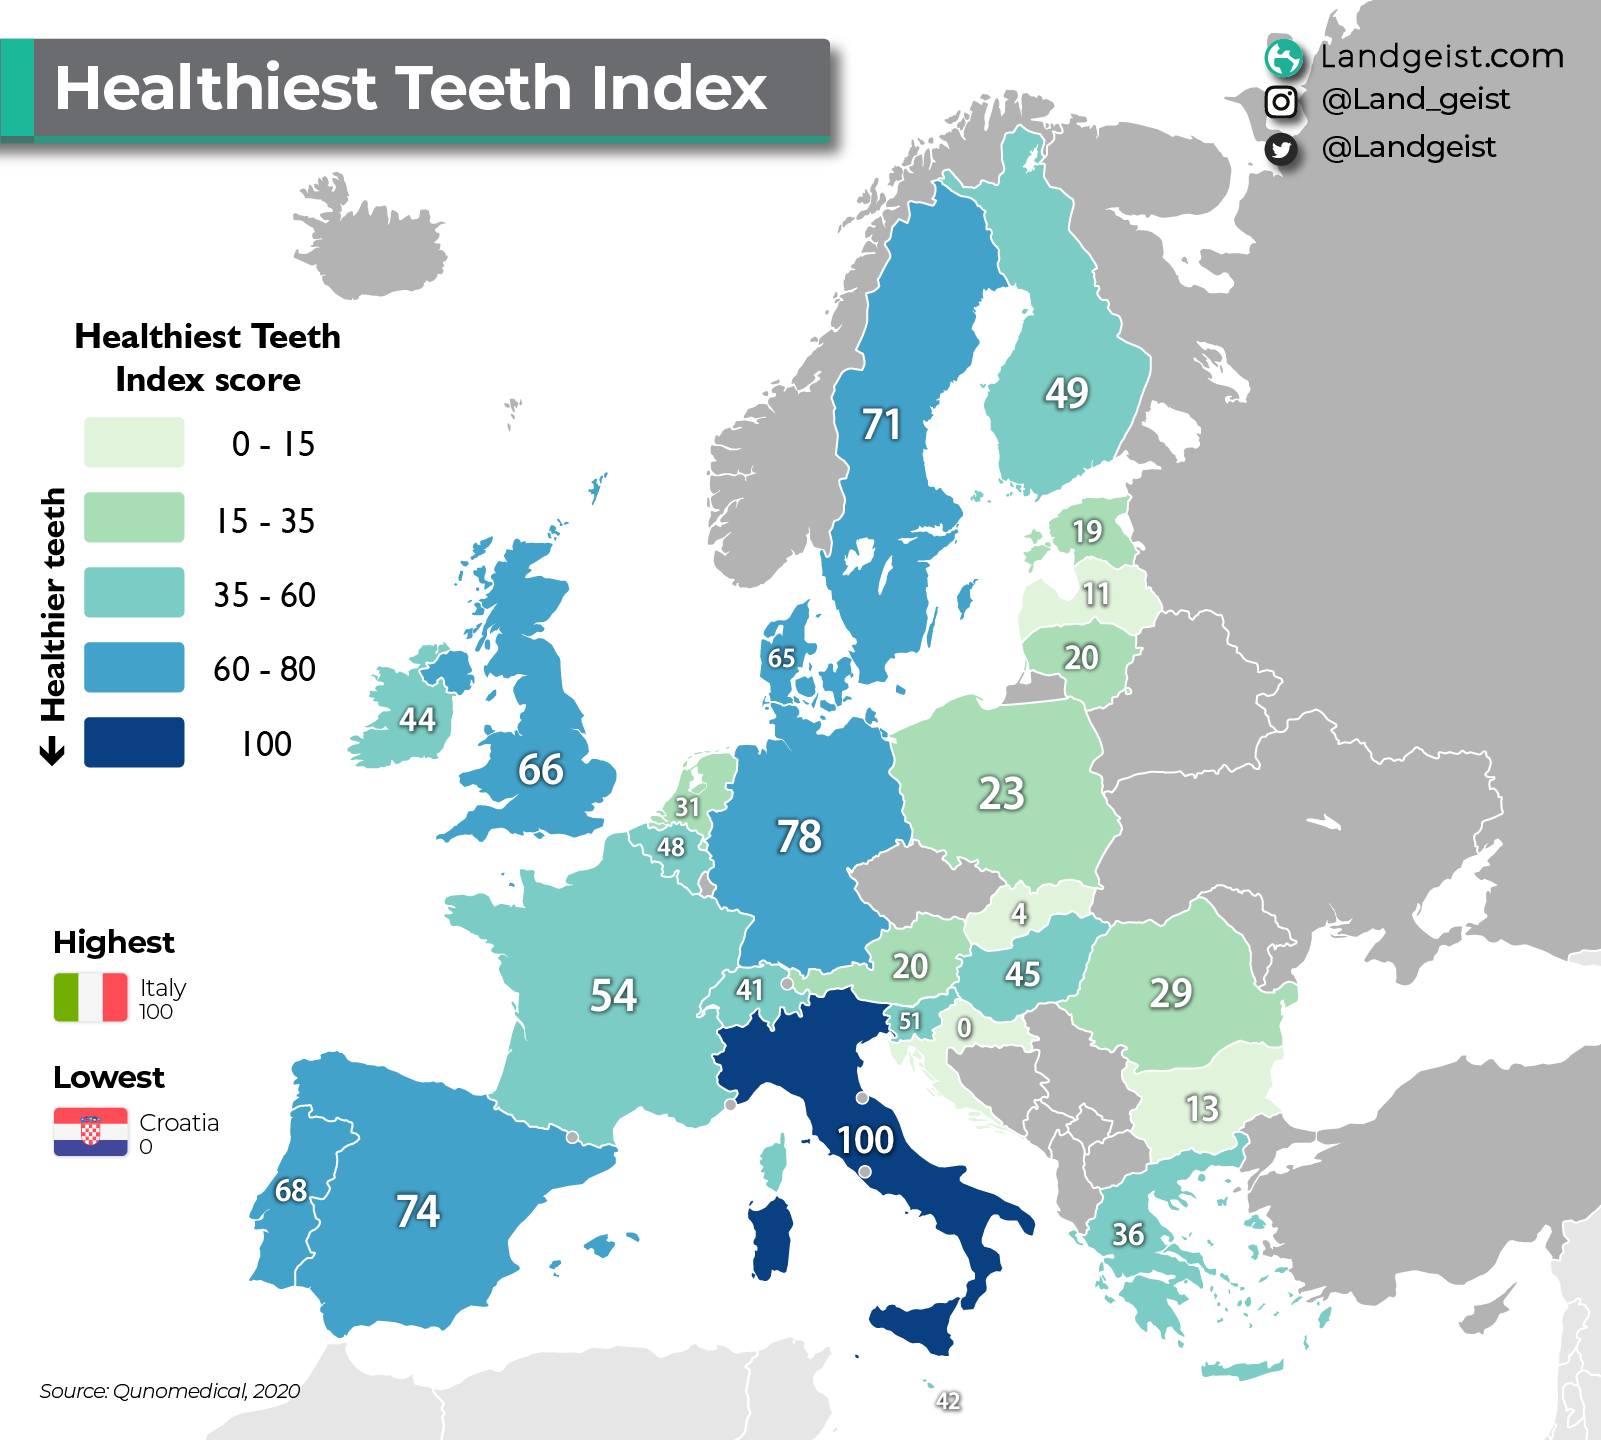 Map showing which countries in Europe have the healthiest teeth.